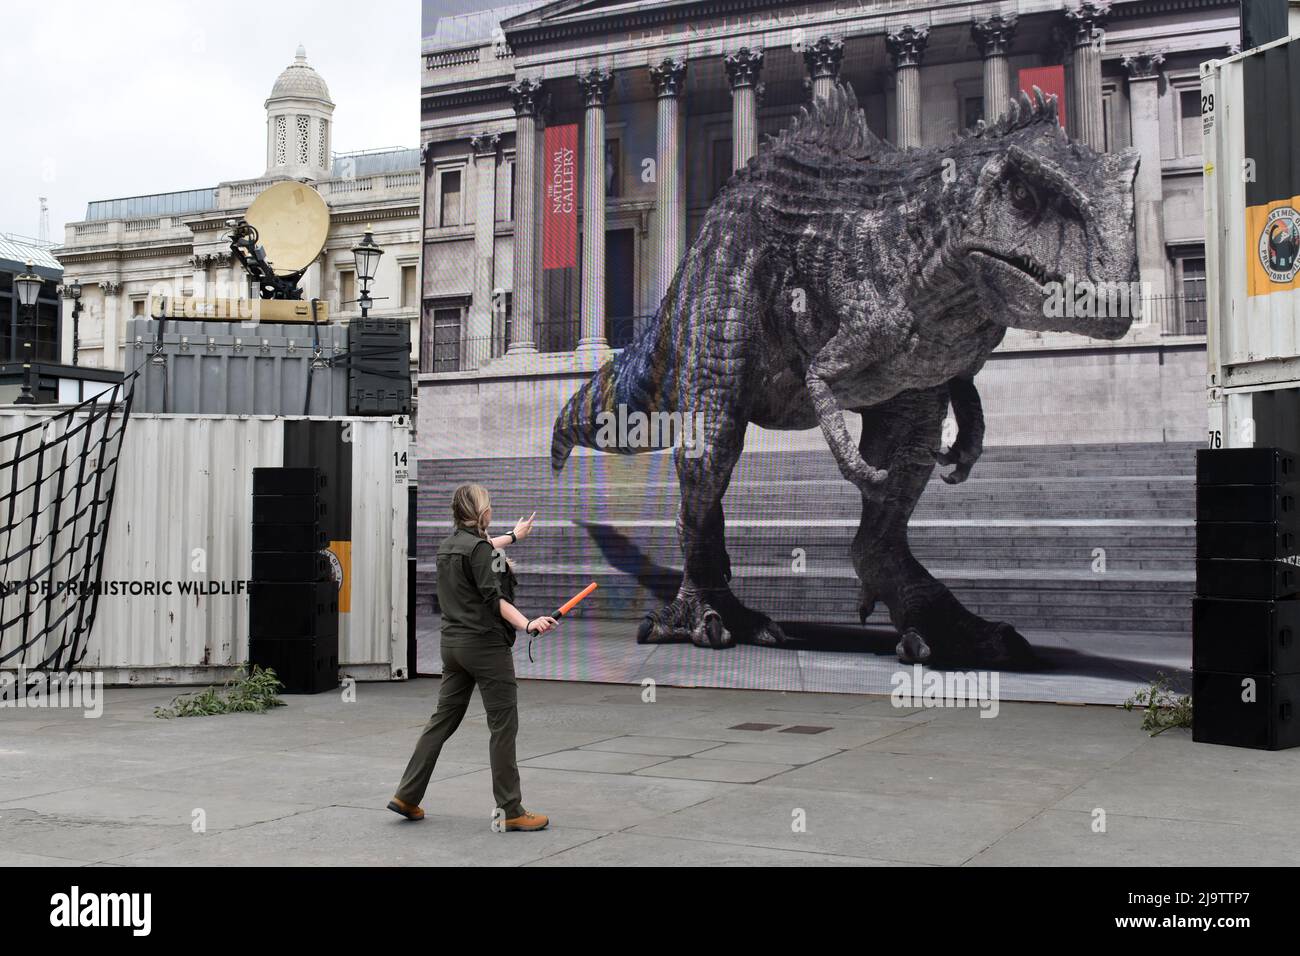 25th May, 2022. London, UK, Jurassic World life size virtual reality dinosaur meets people on Trafalgar Square. The film comes to cinemas on June 10 2022. Tyrannosaurus rex (rex meaning 'king' in Latin), often called T. rex or colloquially T-Rex. Credit: JOHNNY ARMSTEAD/Alamy Live News Stock Photo